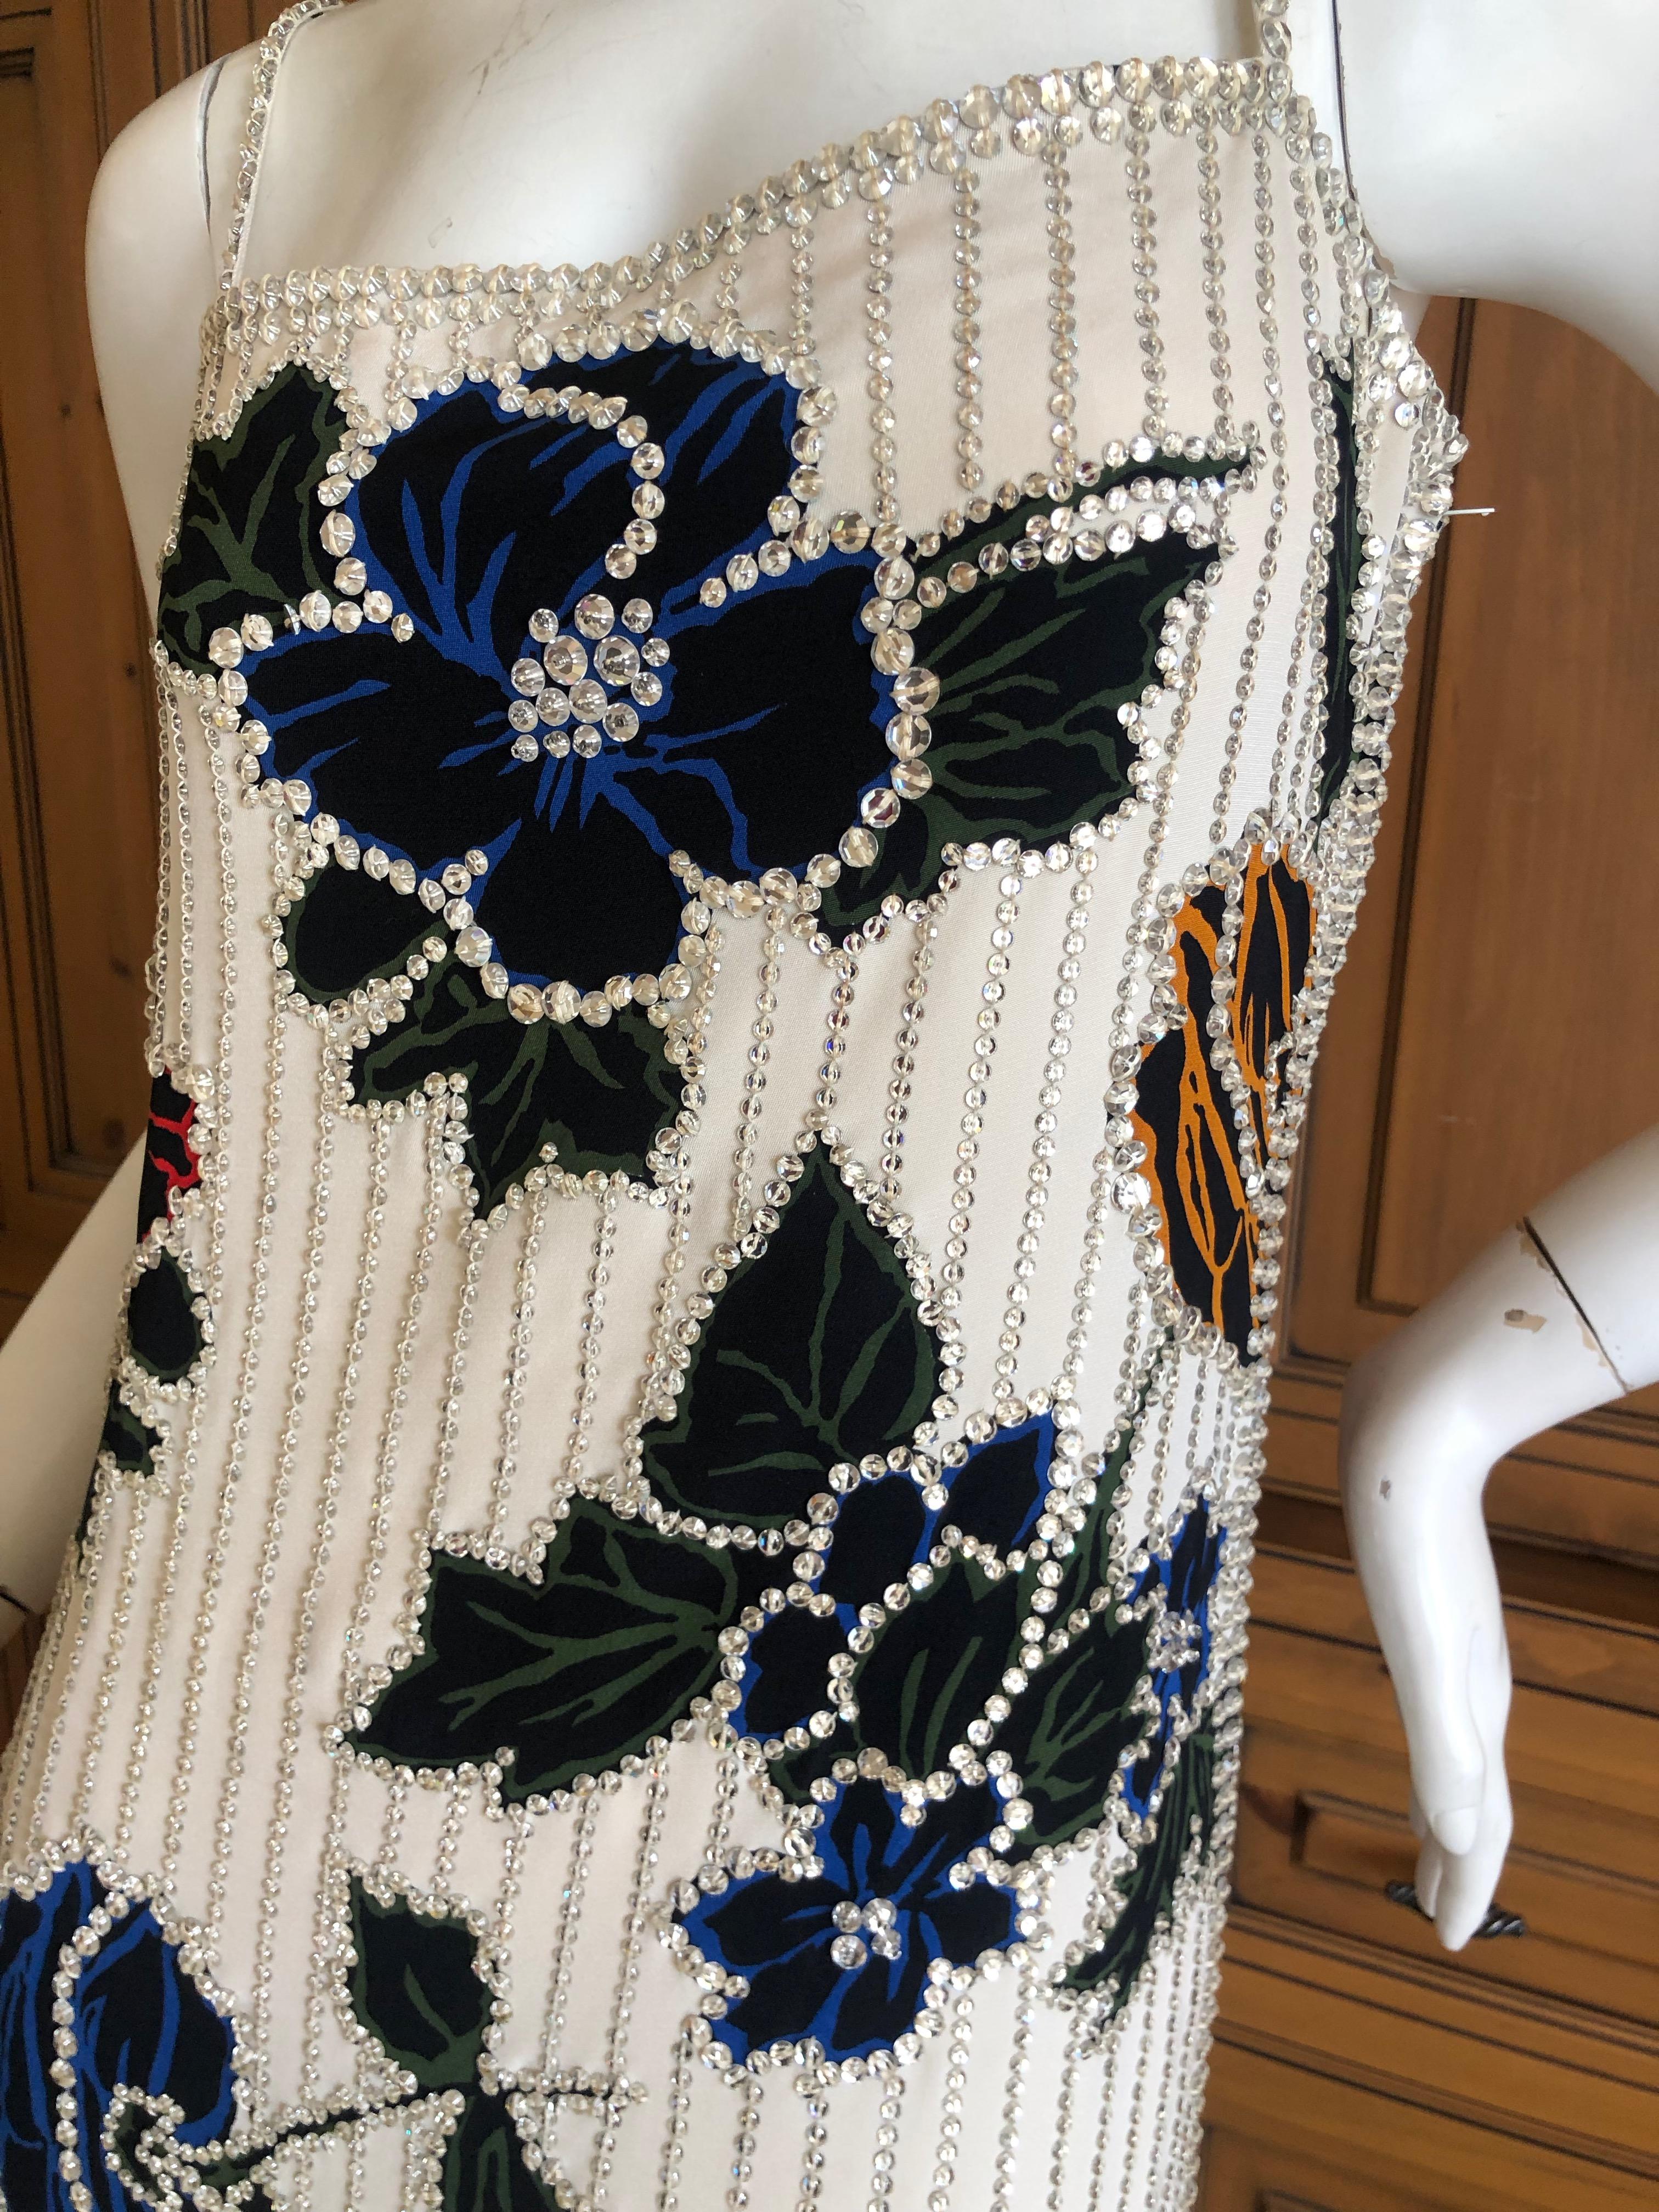 Galanos Applique Silk Floral Dress and Shawl with Swarovski Crystal Details In Excellent Condition For Sale In Cloverdale, CA